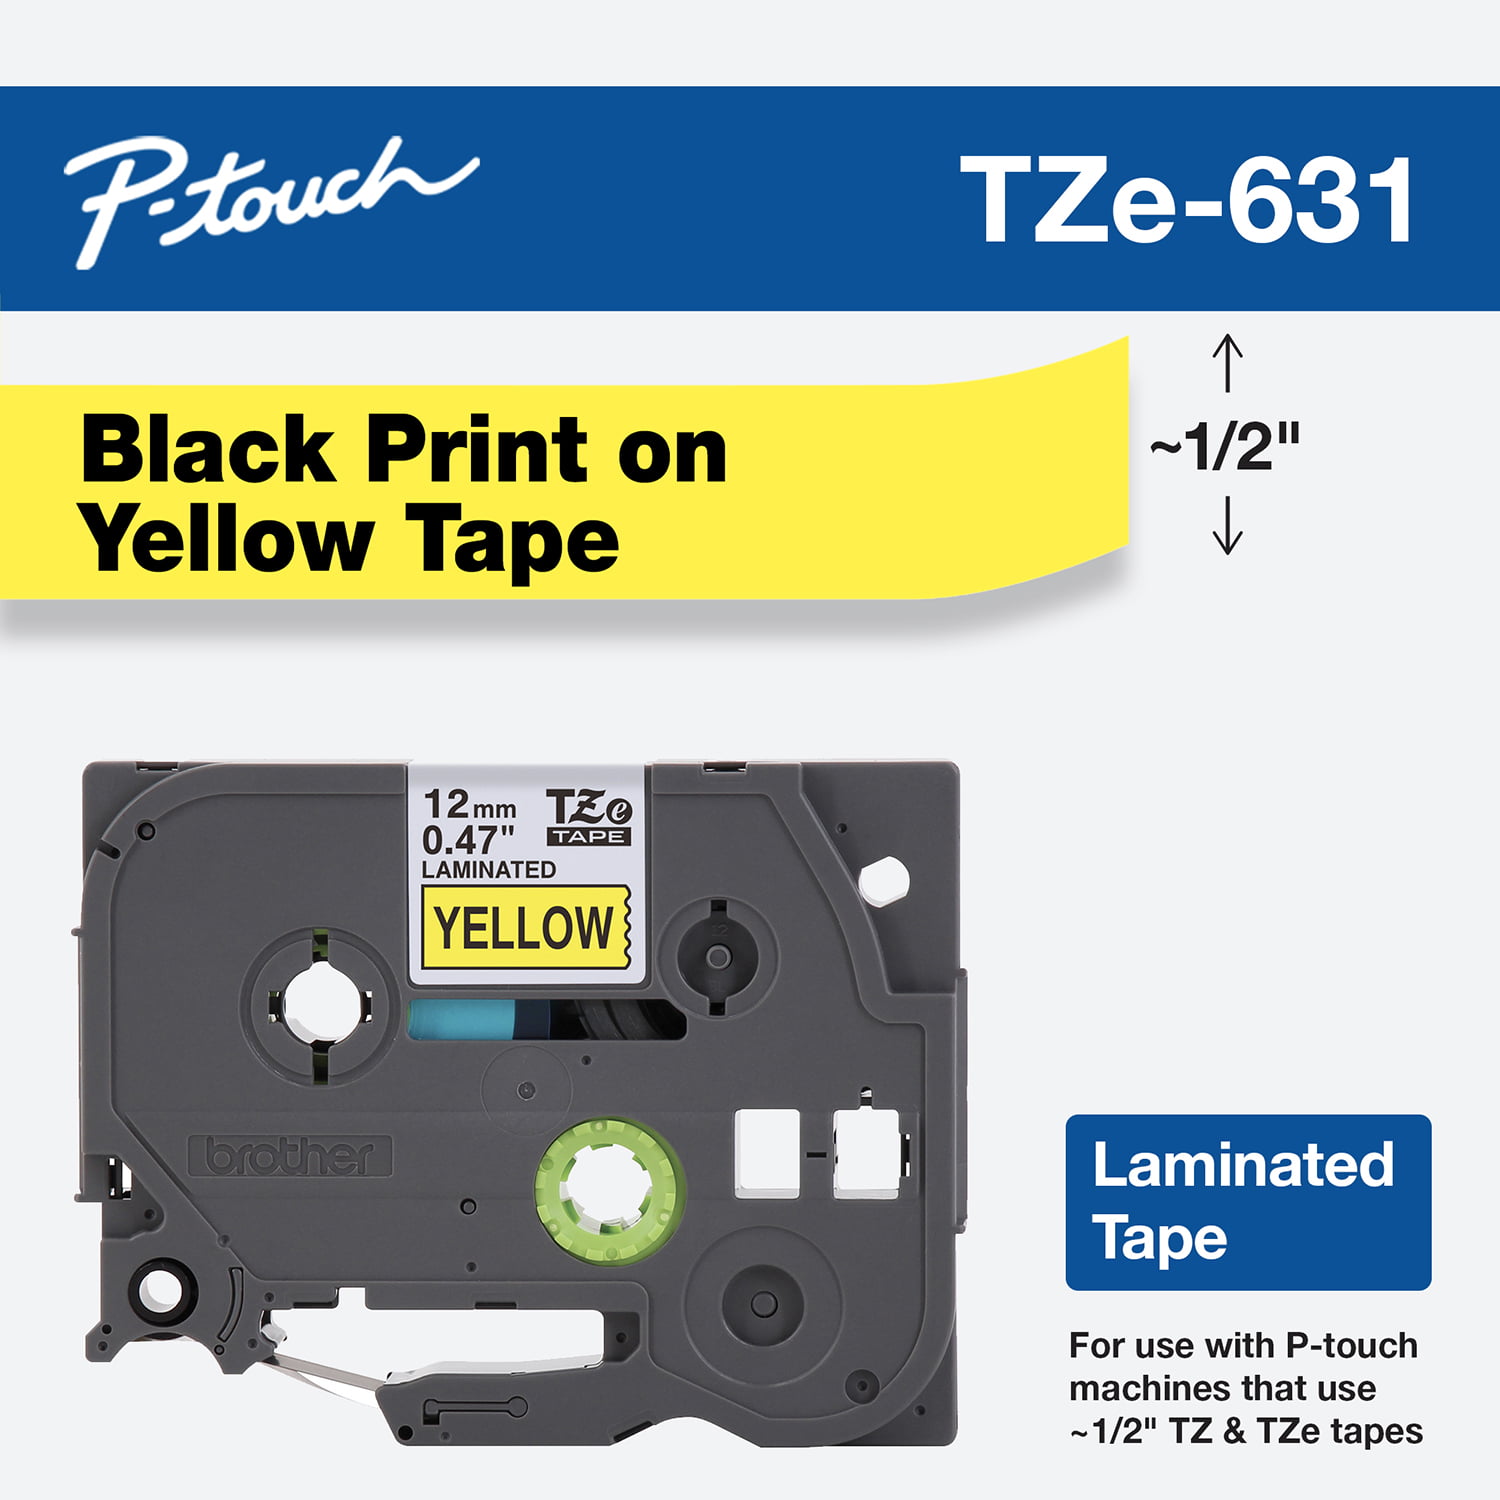 Details about   Tape Cassette LT 631-2 P-TOUCH LABEL Maker Tape 12mm Lot of 2 Black Yellow Tape 